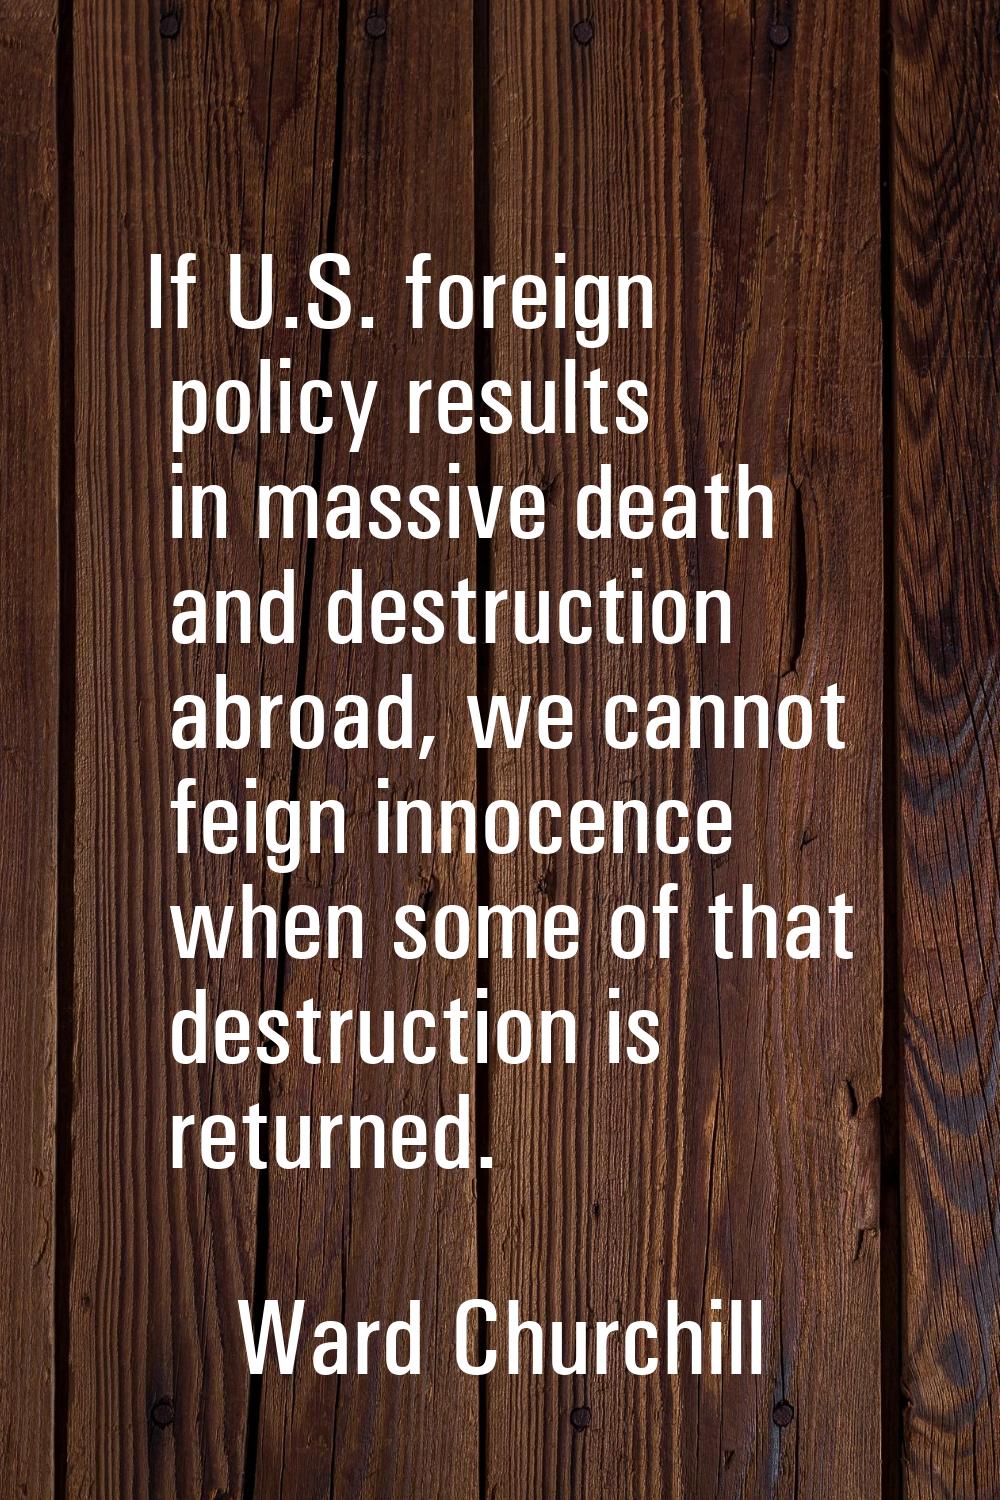 If U.S. foreign policy results in massive death and destruction abroad, we cannot feign innocence w